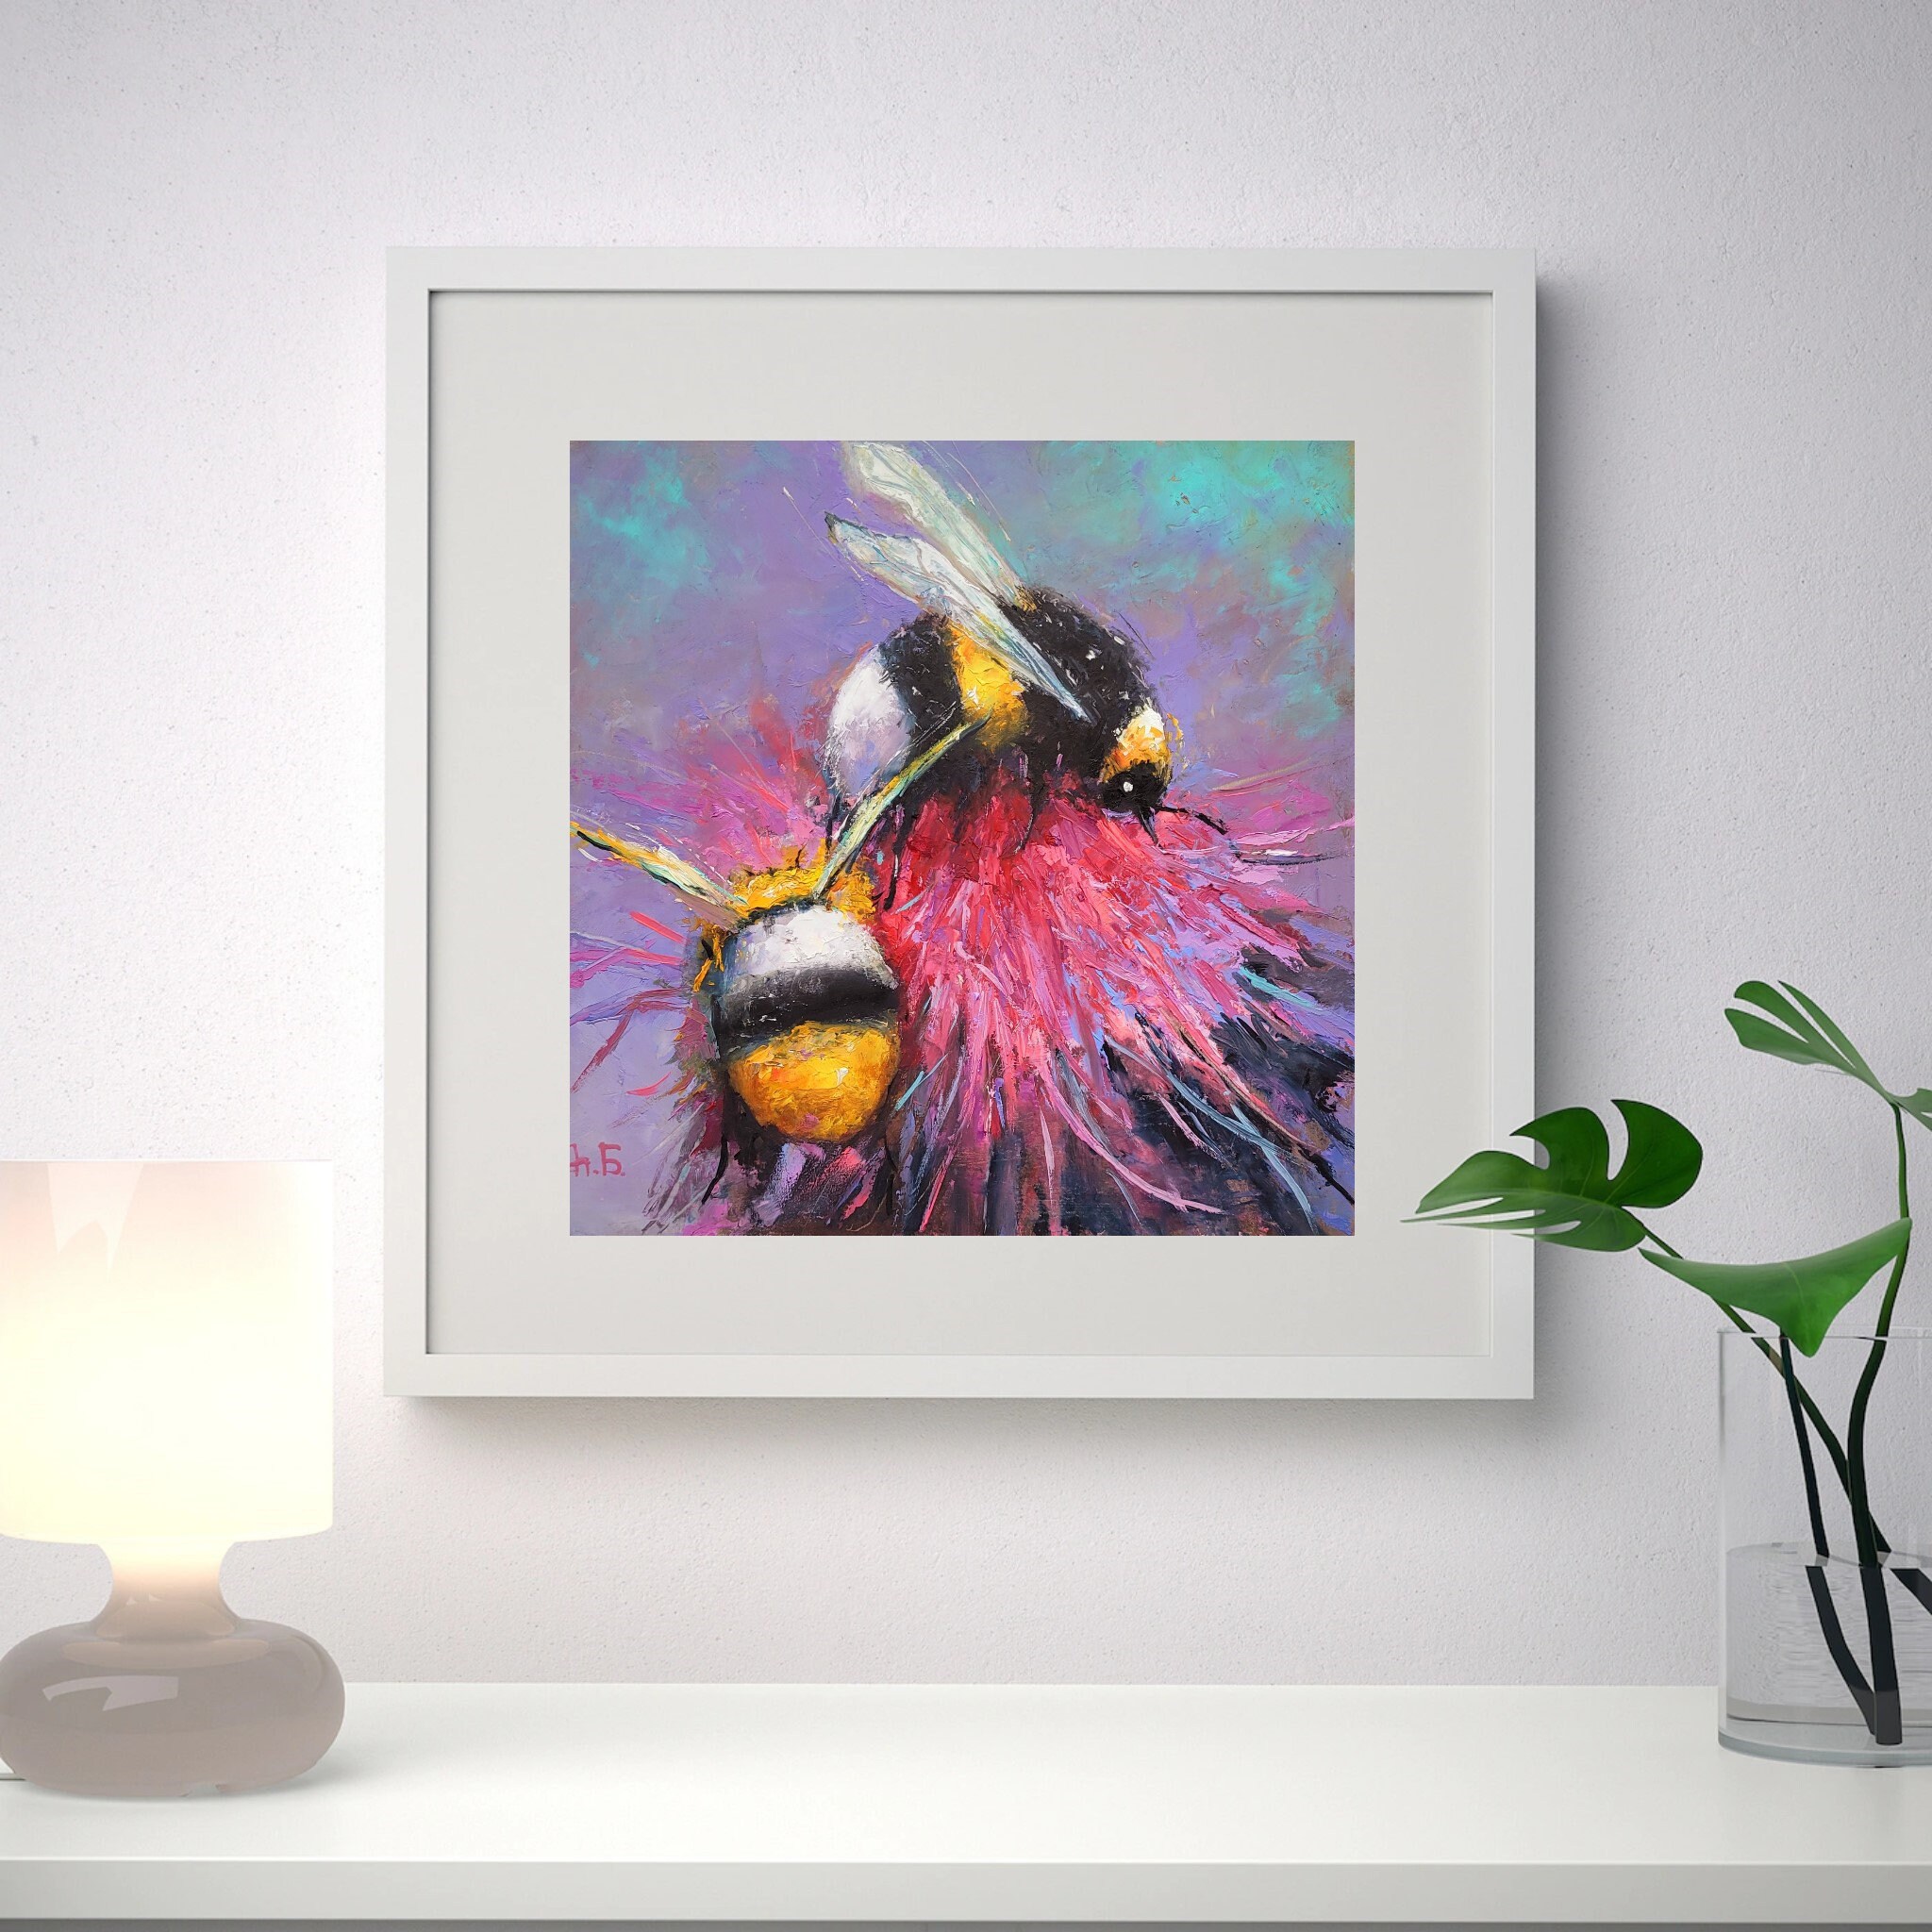 RyounoArt Bee Prints Wall Art Canvas Pictures of Vintage Honey Bee on Daisy  Bumble Bee Home Kitchen Decor Framed